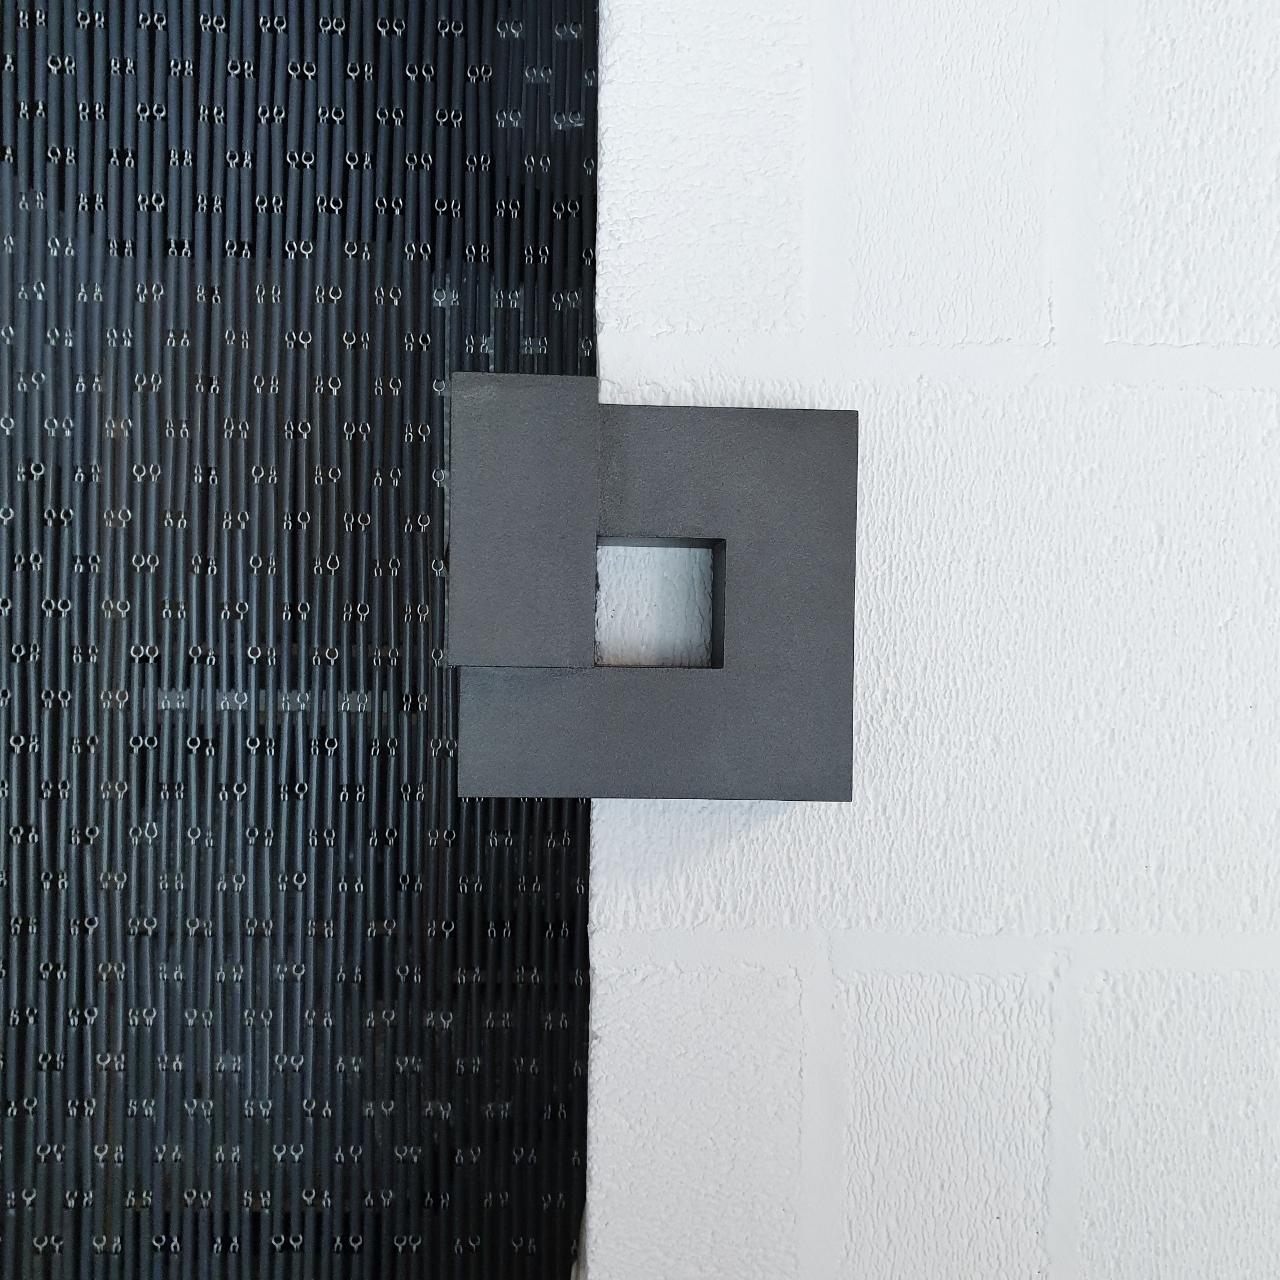 Carré architectural VI no. 14/15 - contemporary modern abstract wall sculpture - Sculpture by Olivier Julia